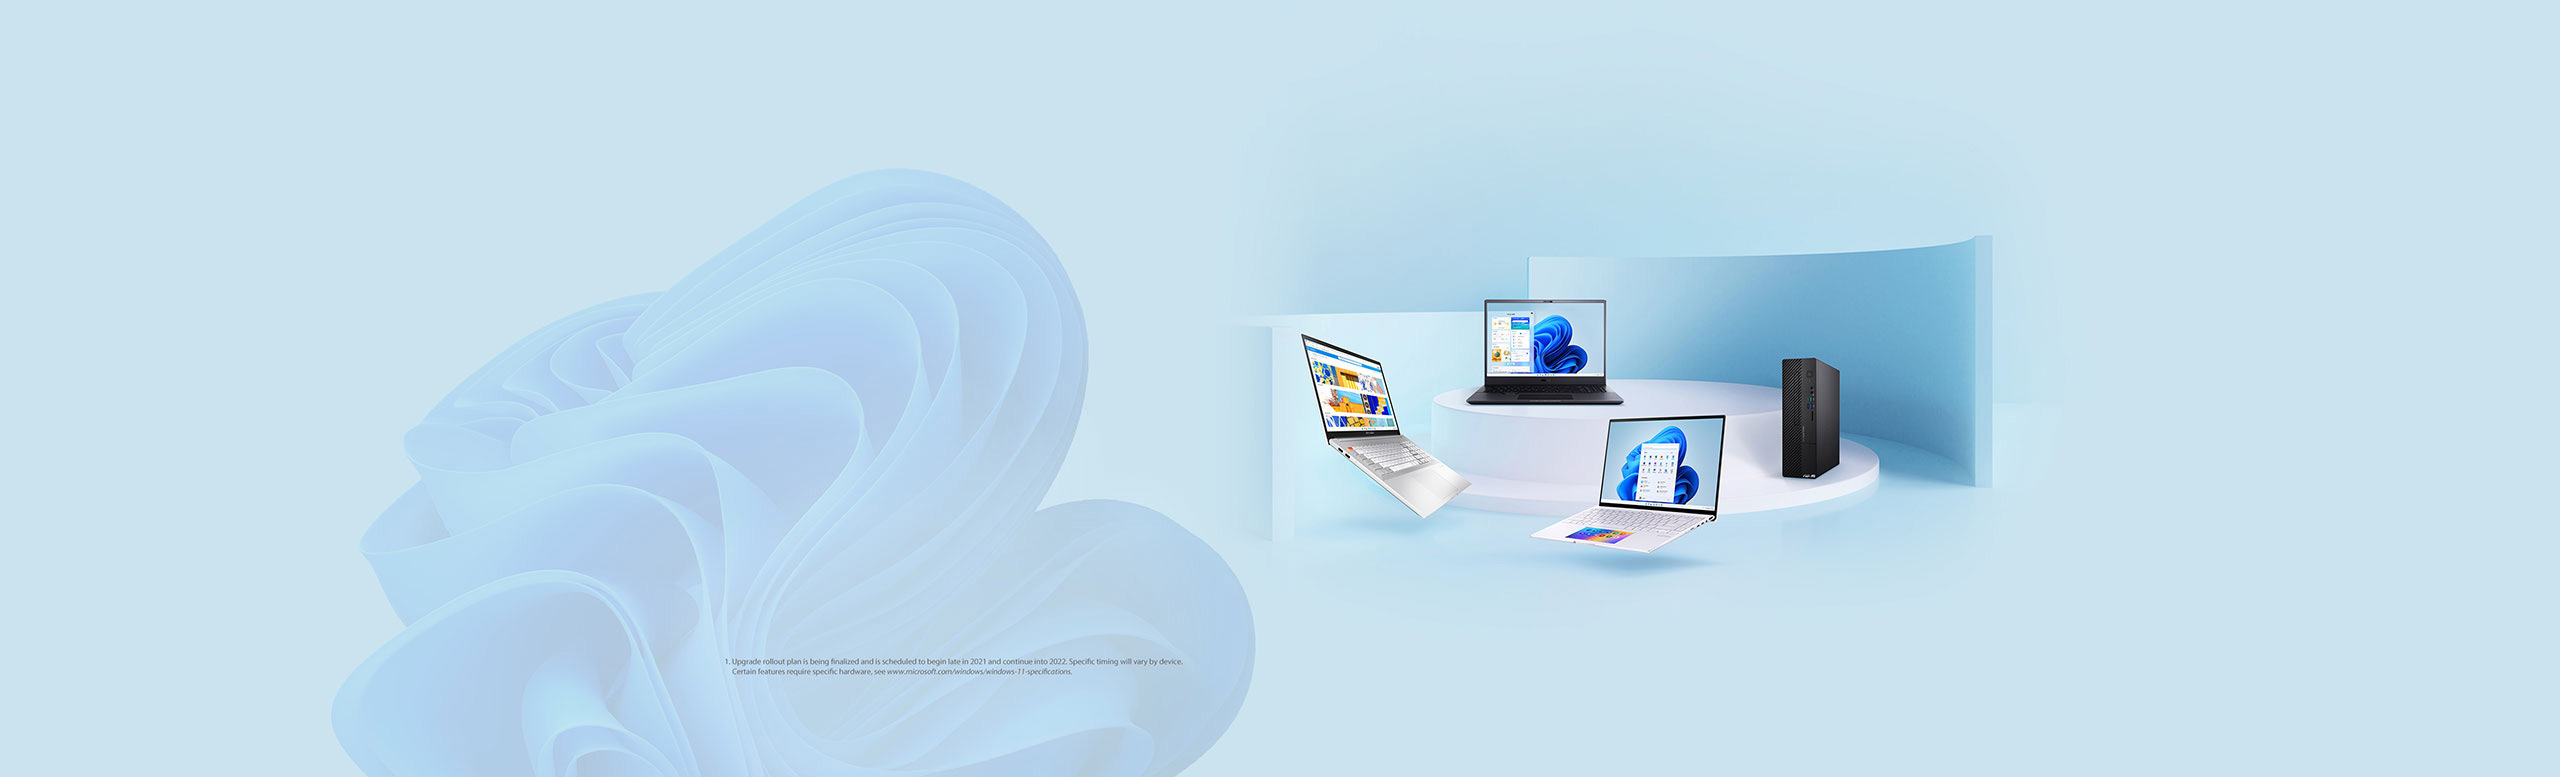 Three ASUS laptops and one ASUS desktop are shown along with different Windows wallpaper in its screen.